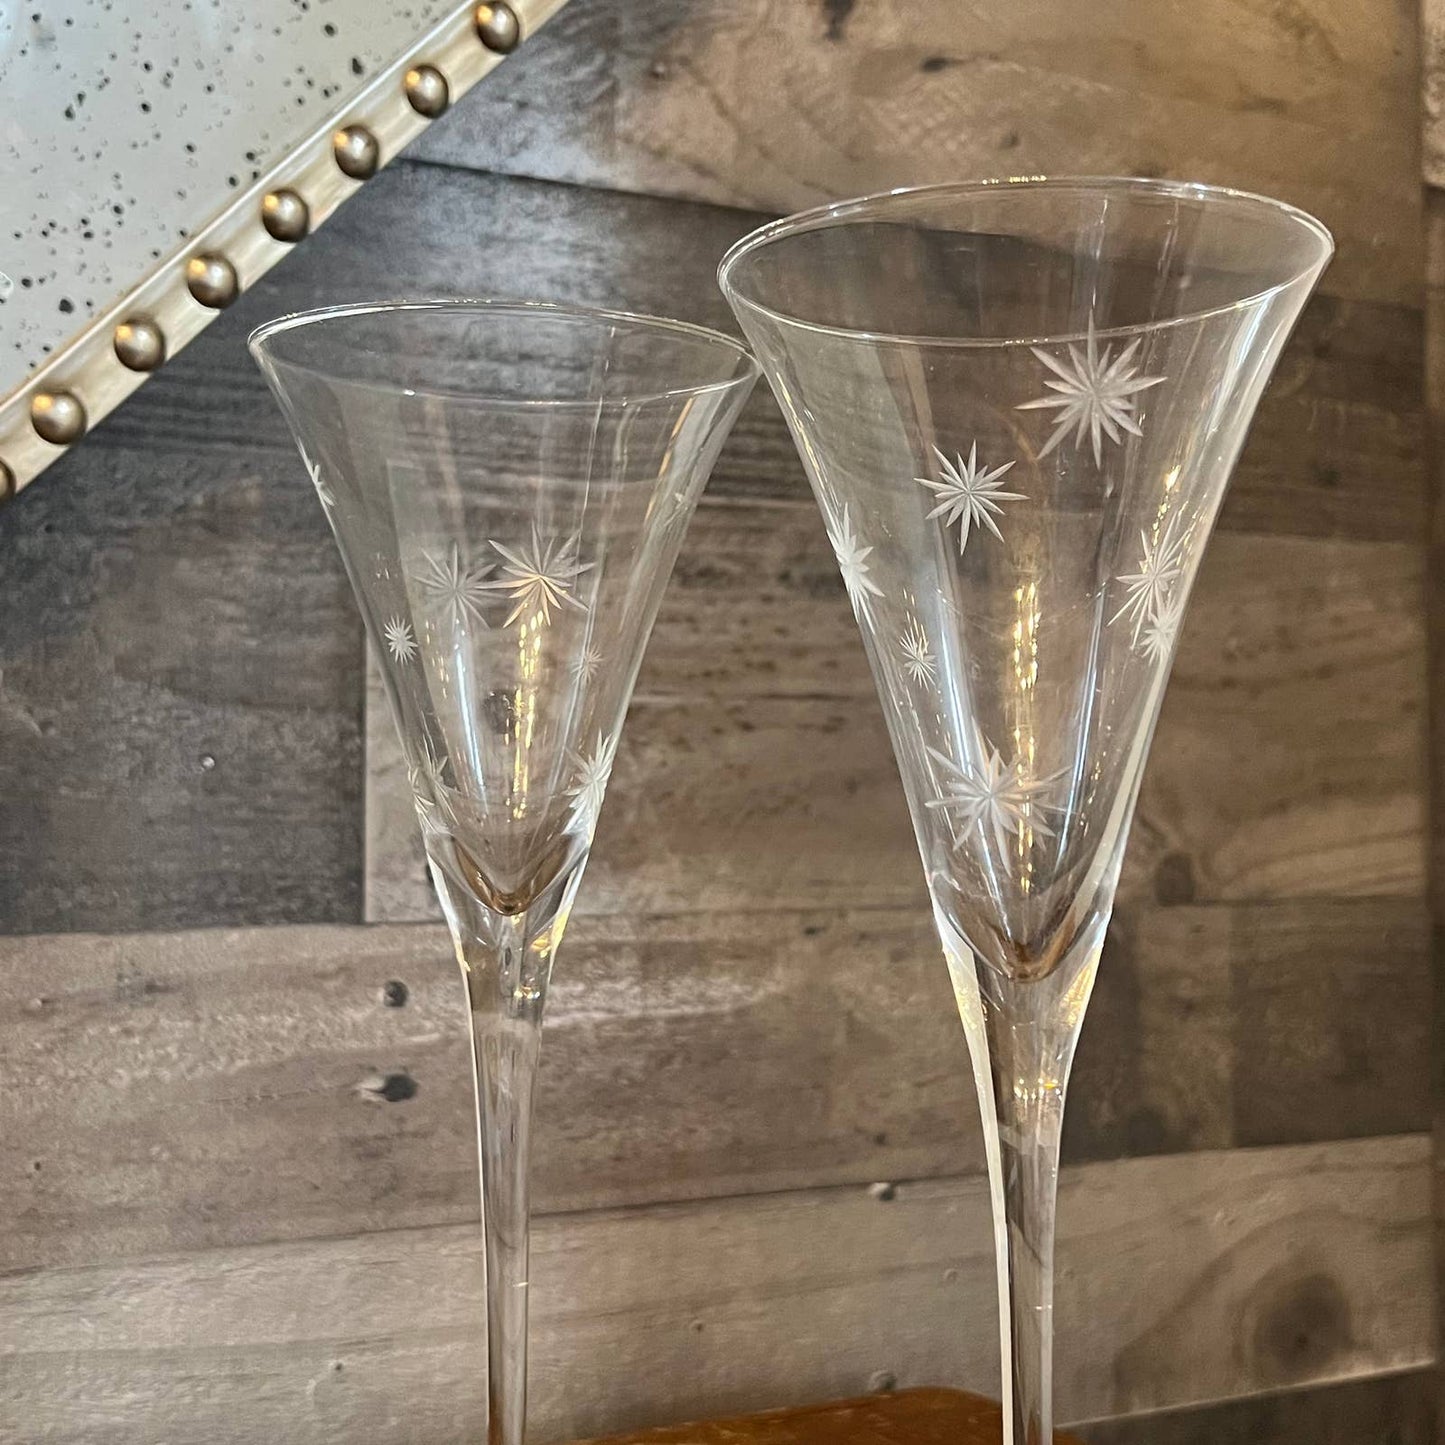 Marquis by Waterford Celebration atomic starburst champagne flute glasses